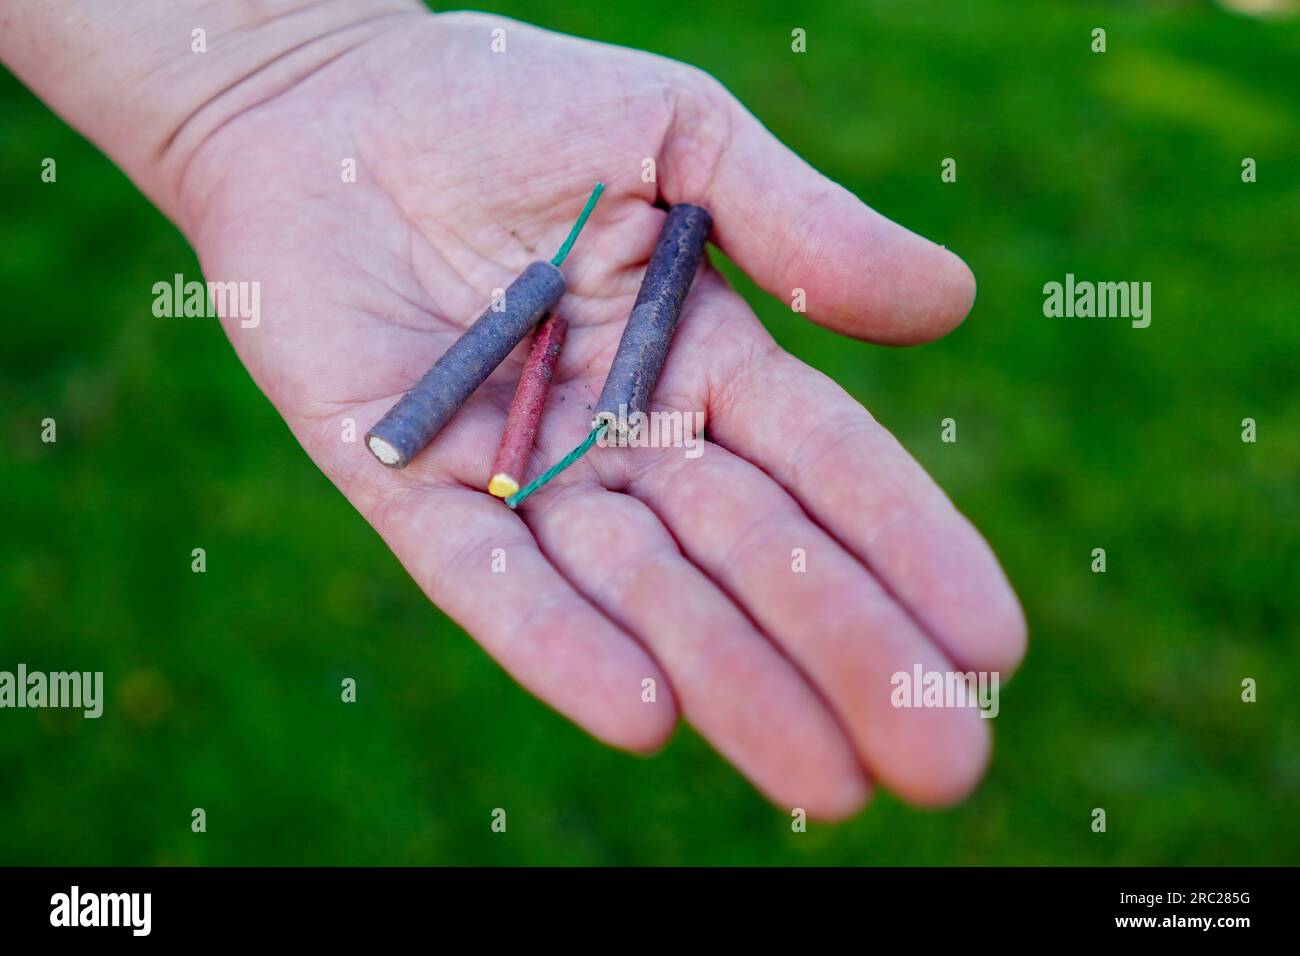 Firecrackers. Person holding firecrackers. Shooting firecrackers and fireworks. Stock Photo